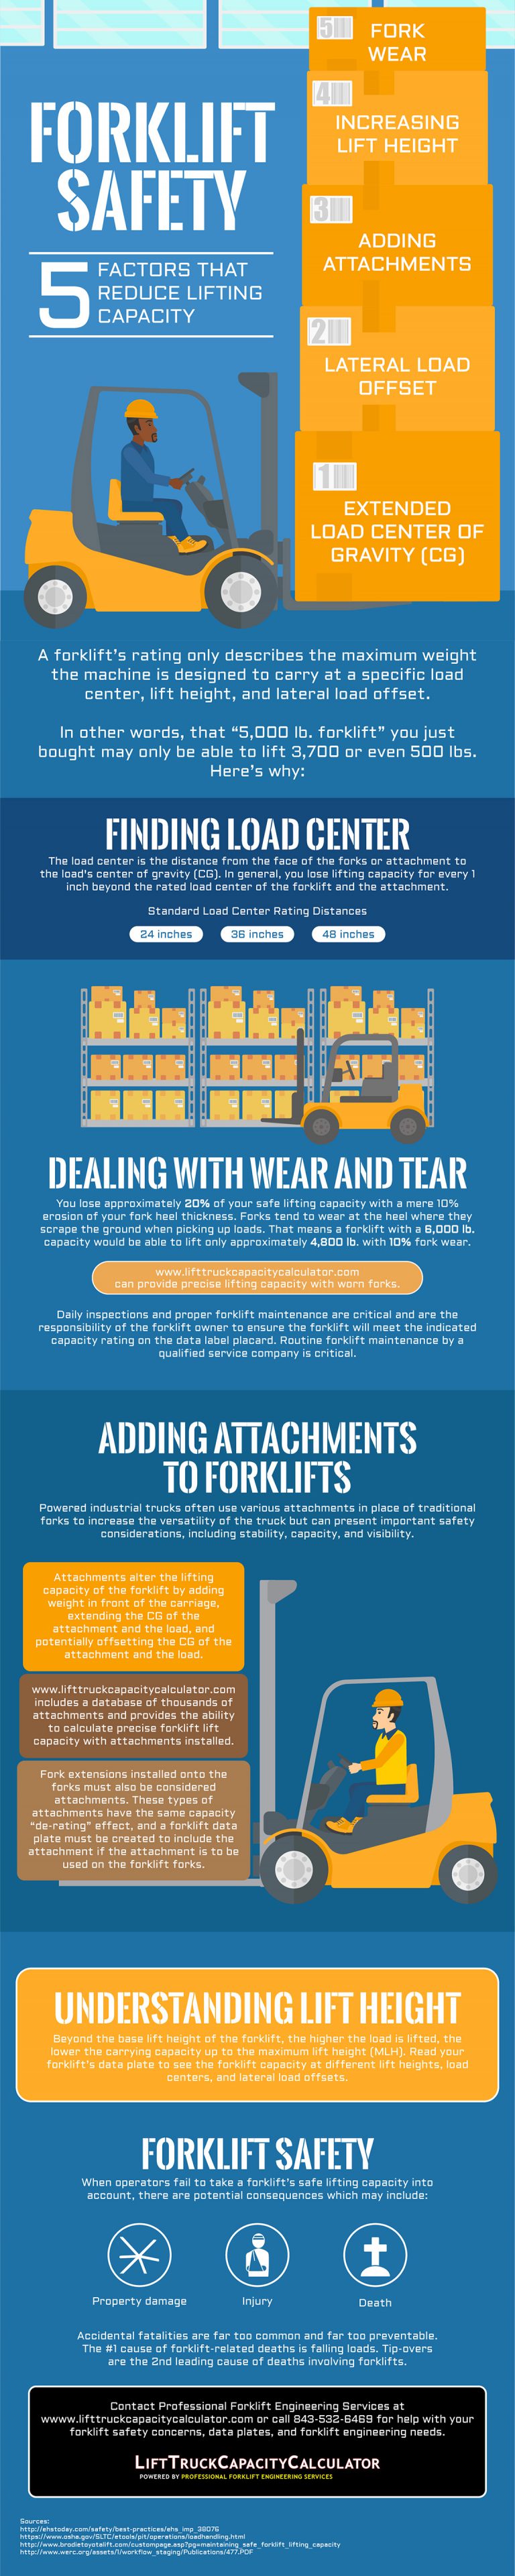 Forklift Safety: 5 Factors That Reduce Lifting Capacity